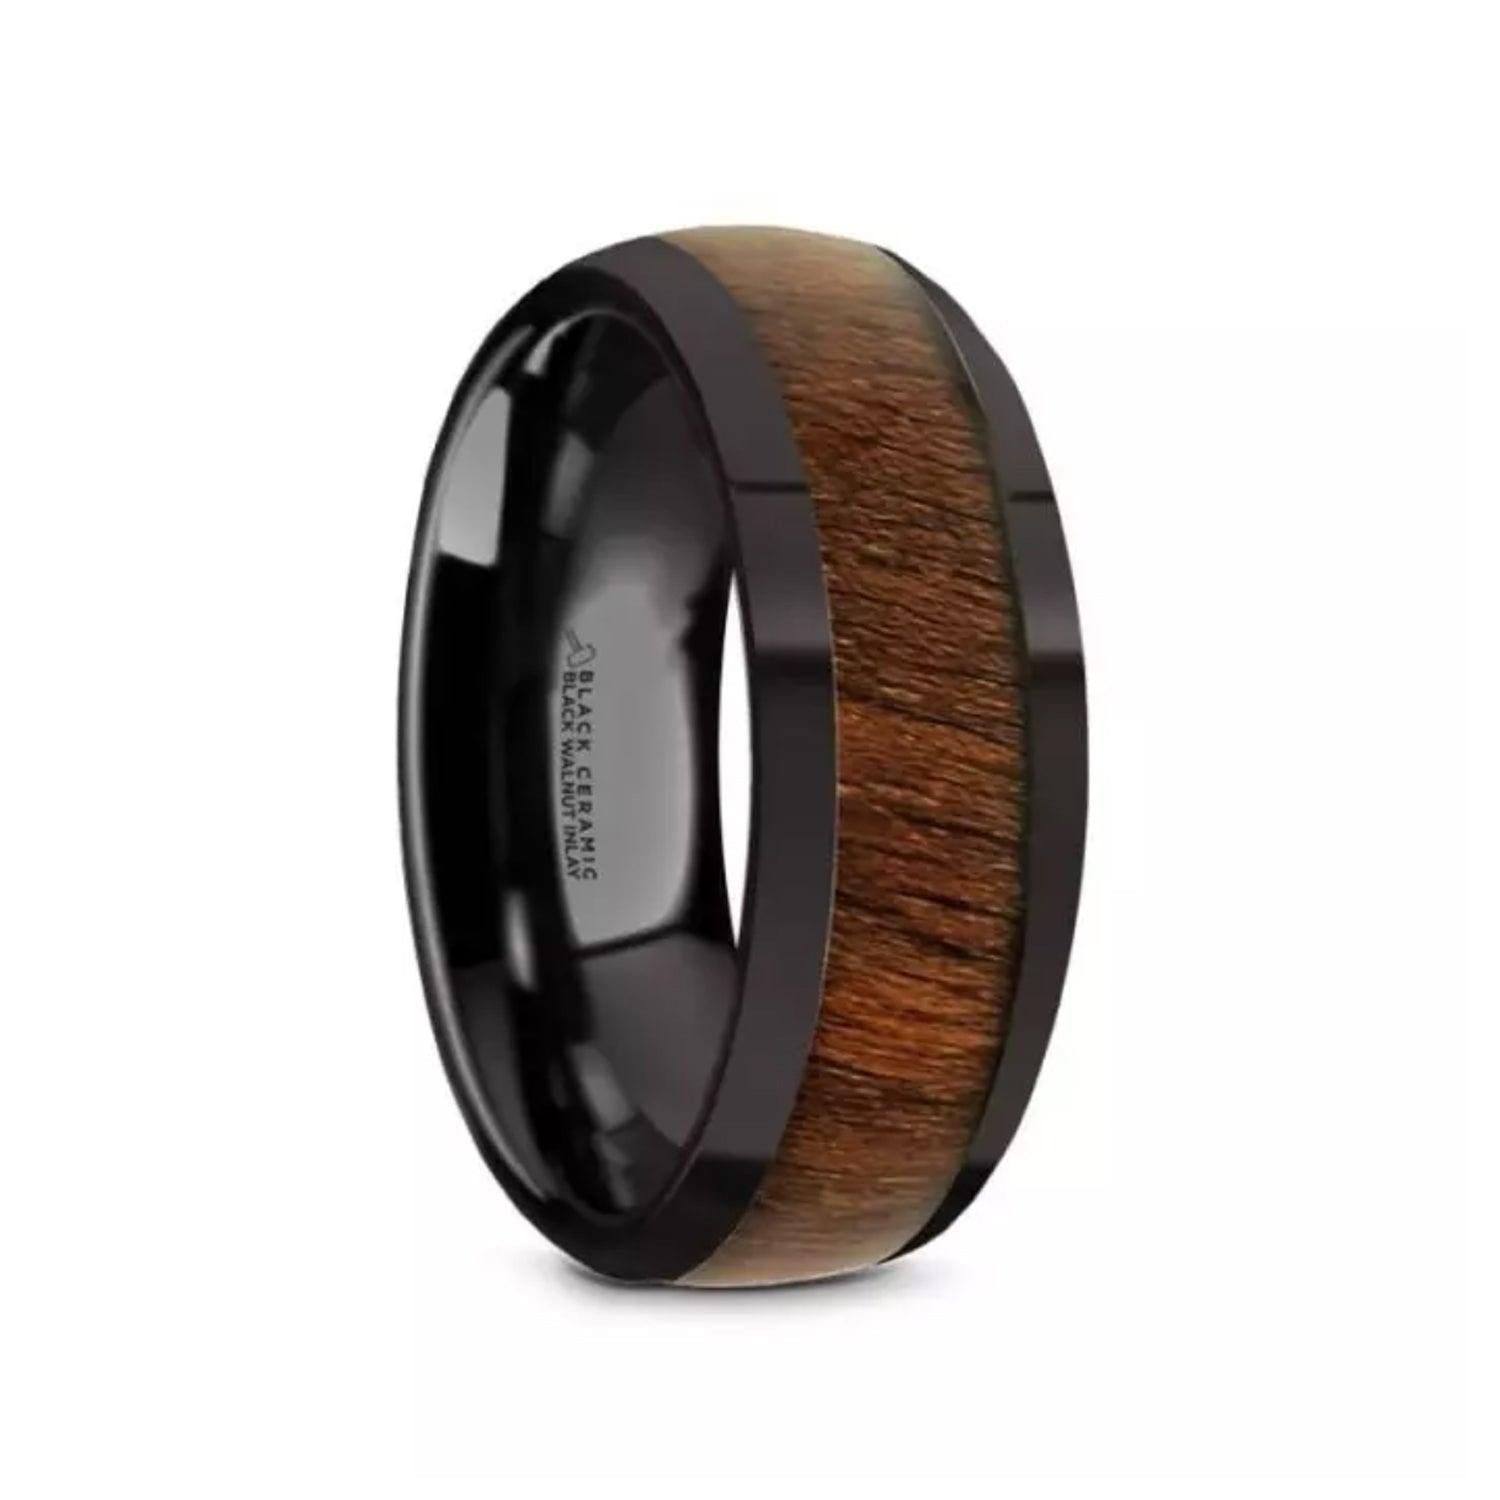 WALLACE - Black Ceramic Polished Finish Men’s Domed Wedding Band with Black Walnut Inlay - 8mm - The Rutile Ltd